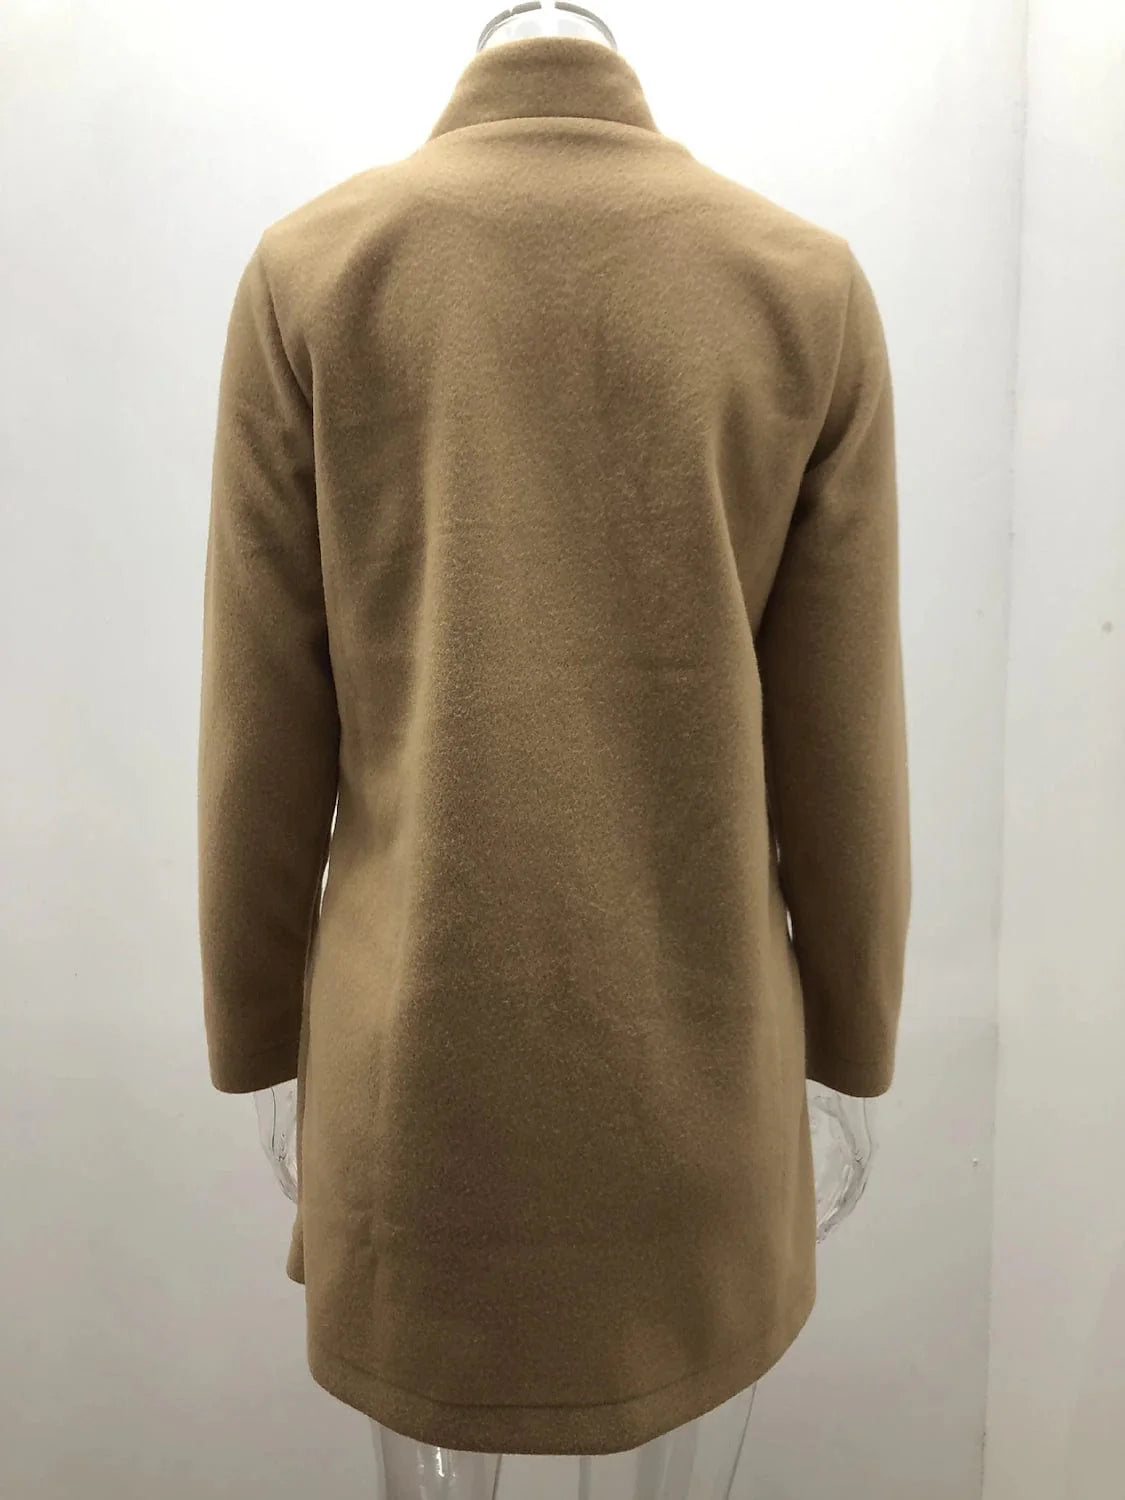 Caramel Colored Women's Open Front Regular Jacket for Spring, Fall, and Christmas